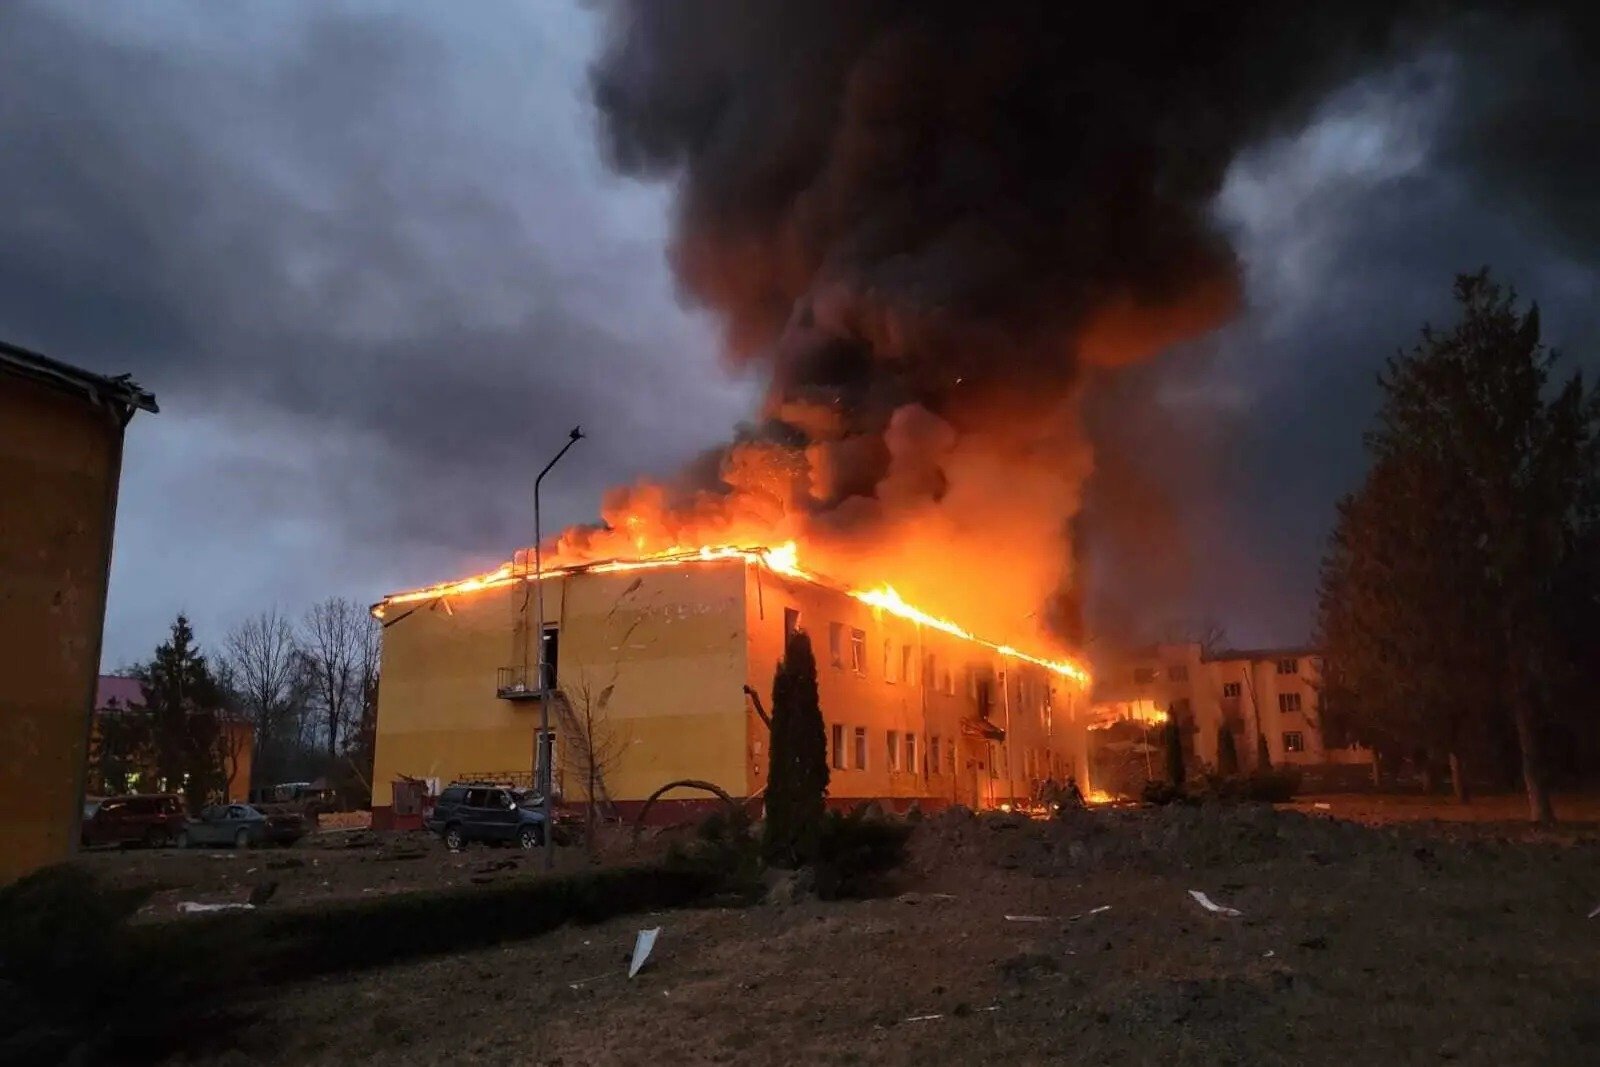 A hostel building, part of a larger training facility,burns.